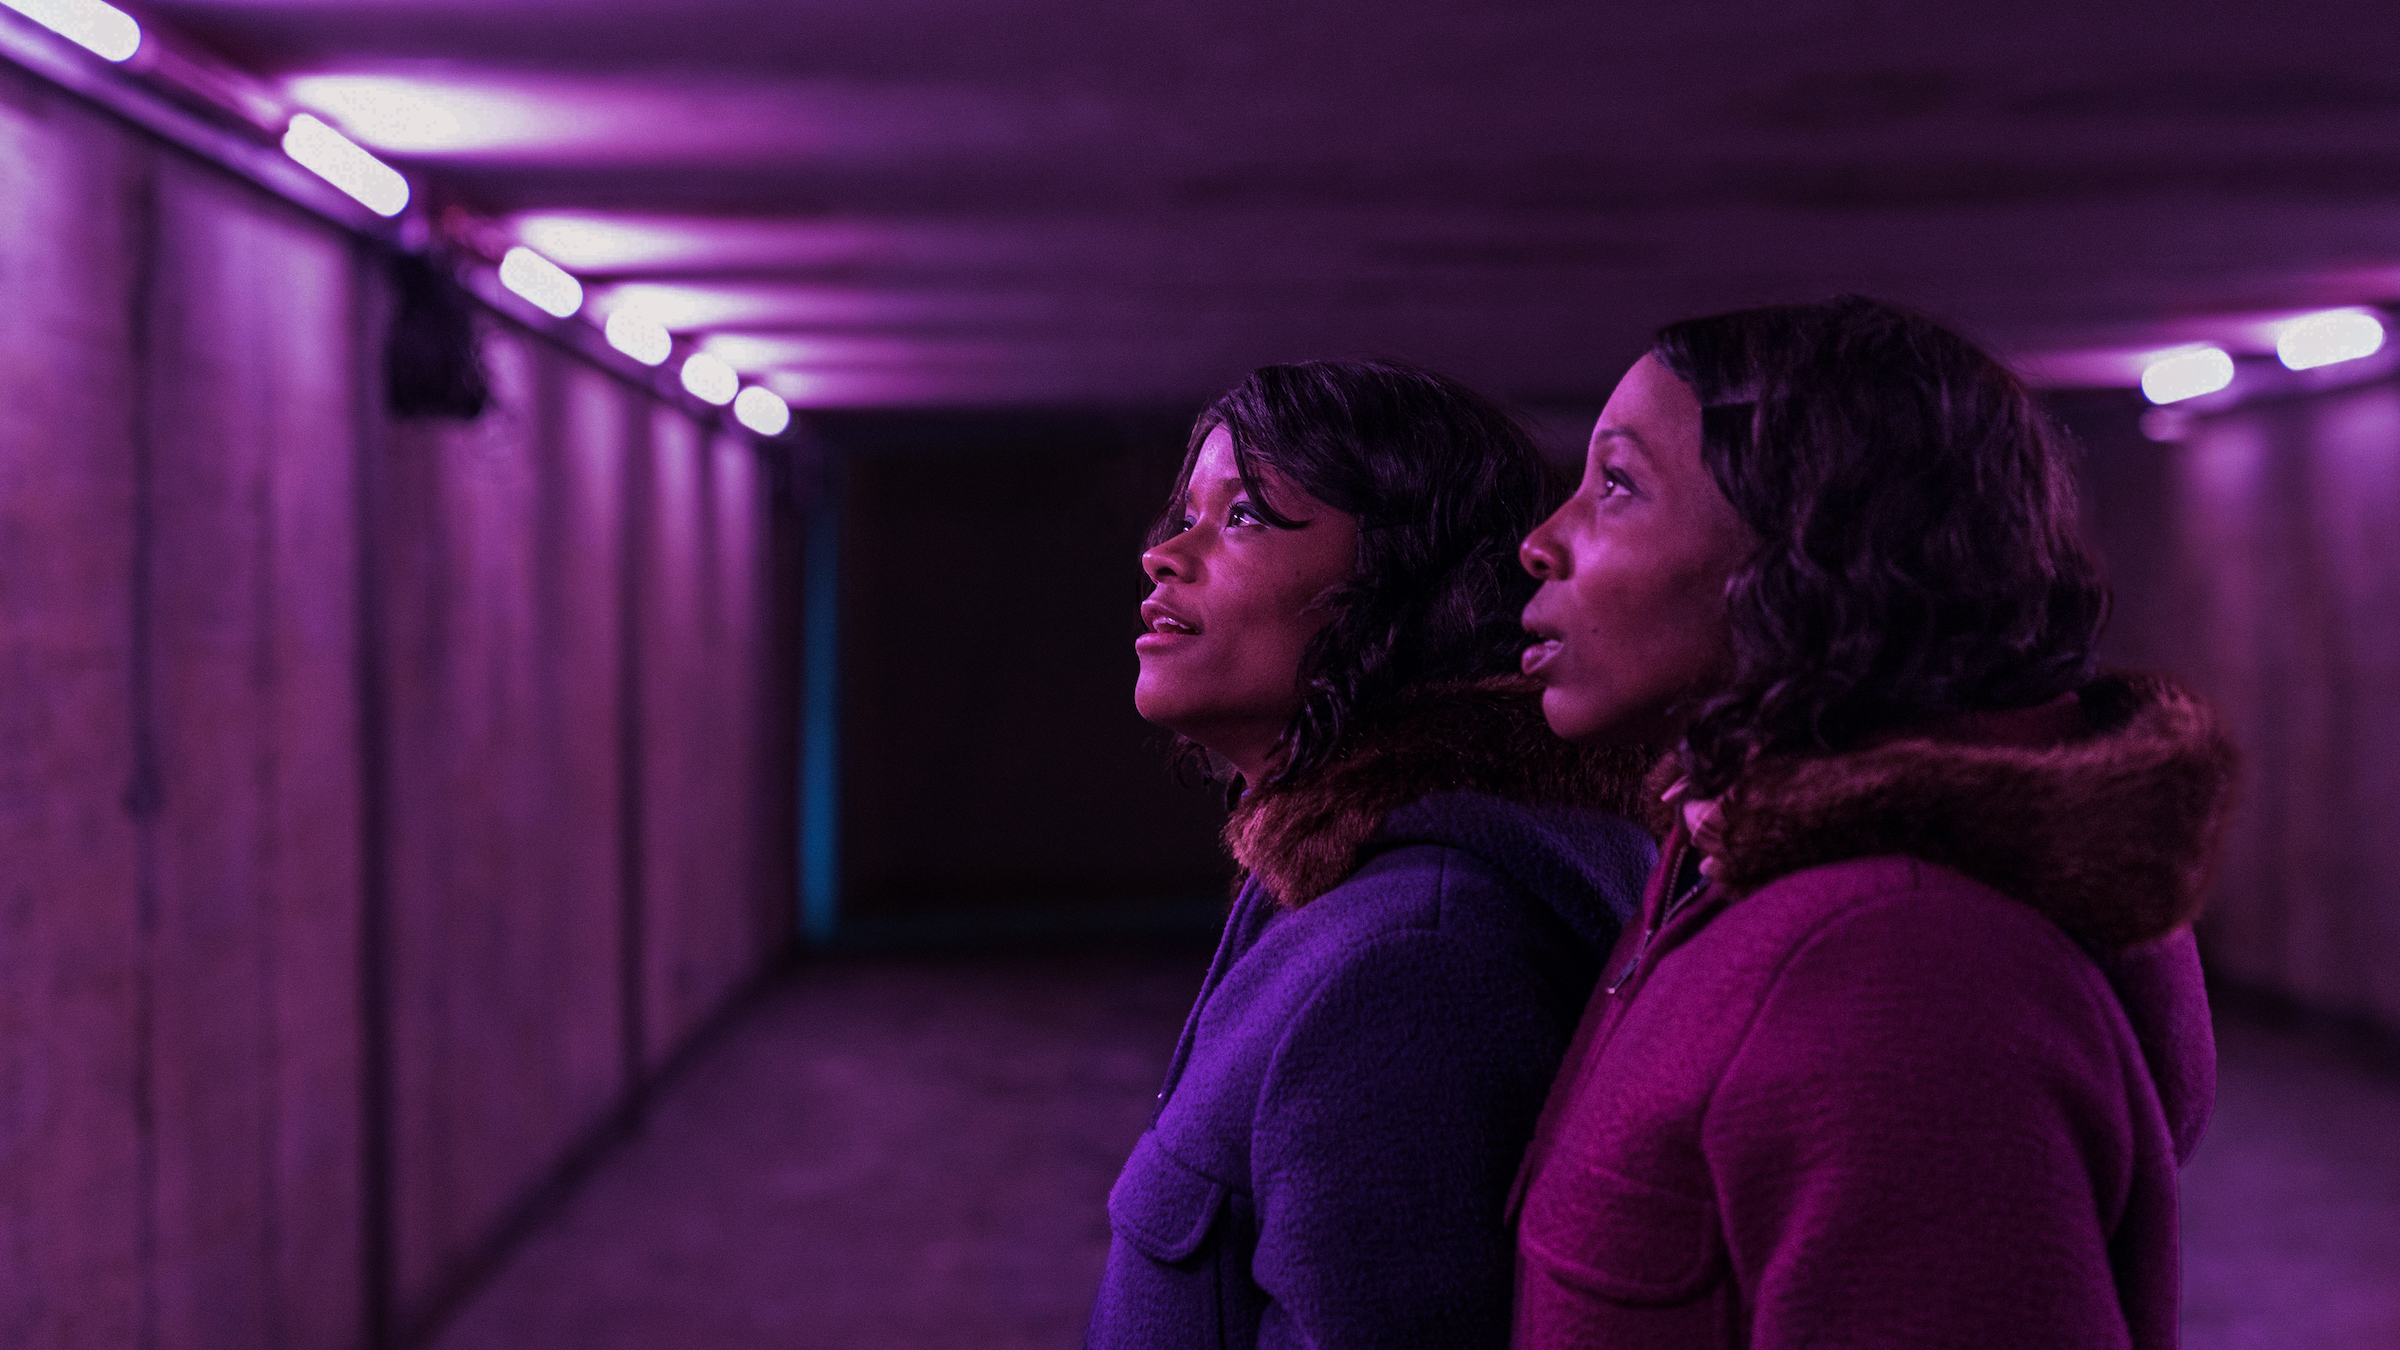 Letitia Wright as June Gibbons and Tamara Lawrance as Jennifer Gibbons gaze up at the purple lights in a concrete underpass